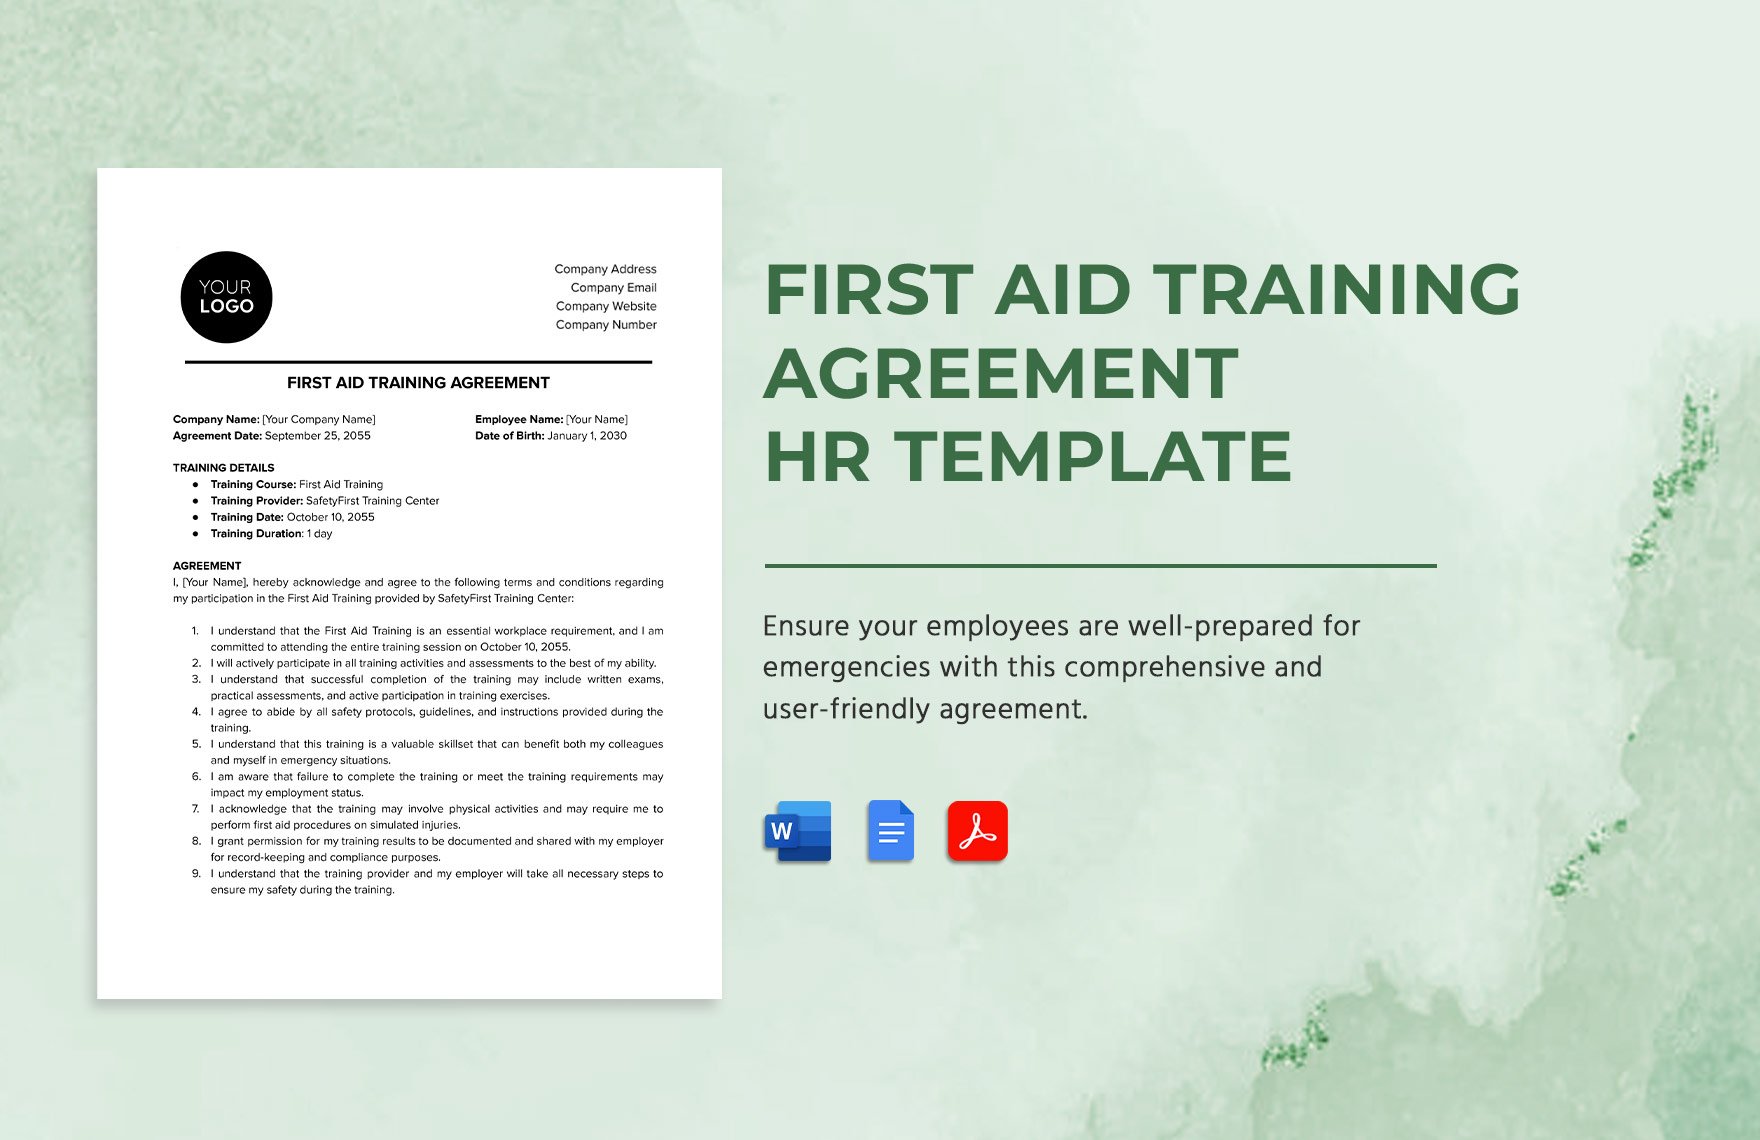 First Aid Training Agreement HR Template in Word, Google Docs, PDF